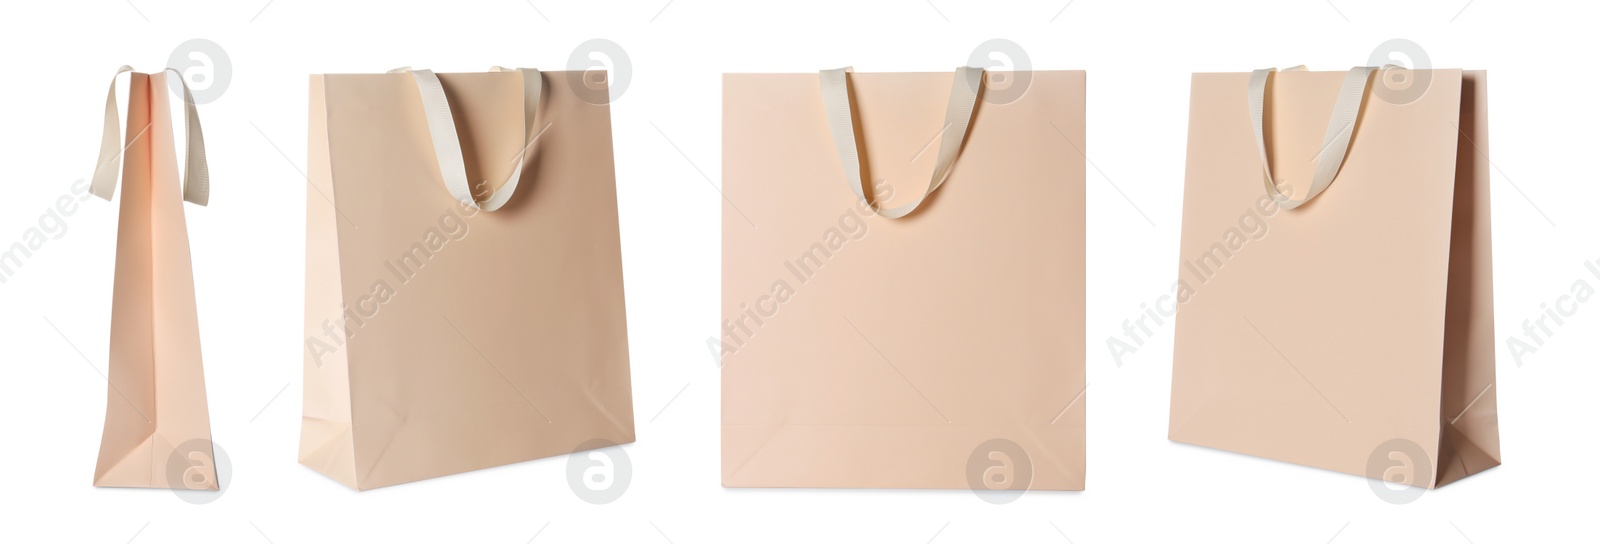 Image of Beige shopping bag isolated on white, different sides